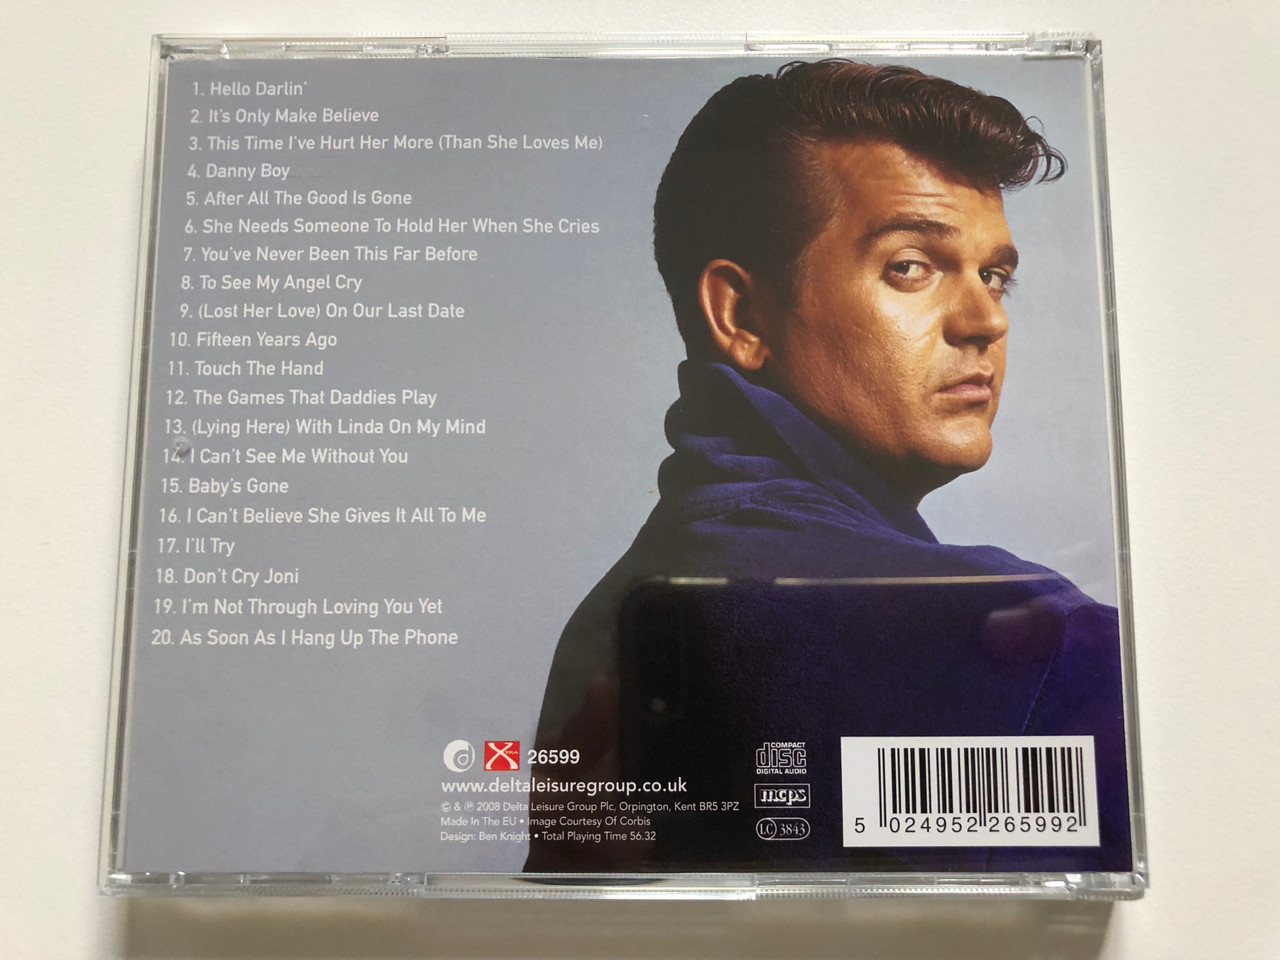 https://cdn10.bigcommerce.com/s-62bdpkt7pb/products/31044/images/182975/Conway_Twitty_Hello_Darlin_Delta_Audio_CD_2008_26599_4__21366.1624958467.1280.1280.JPG?c=2